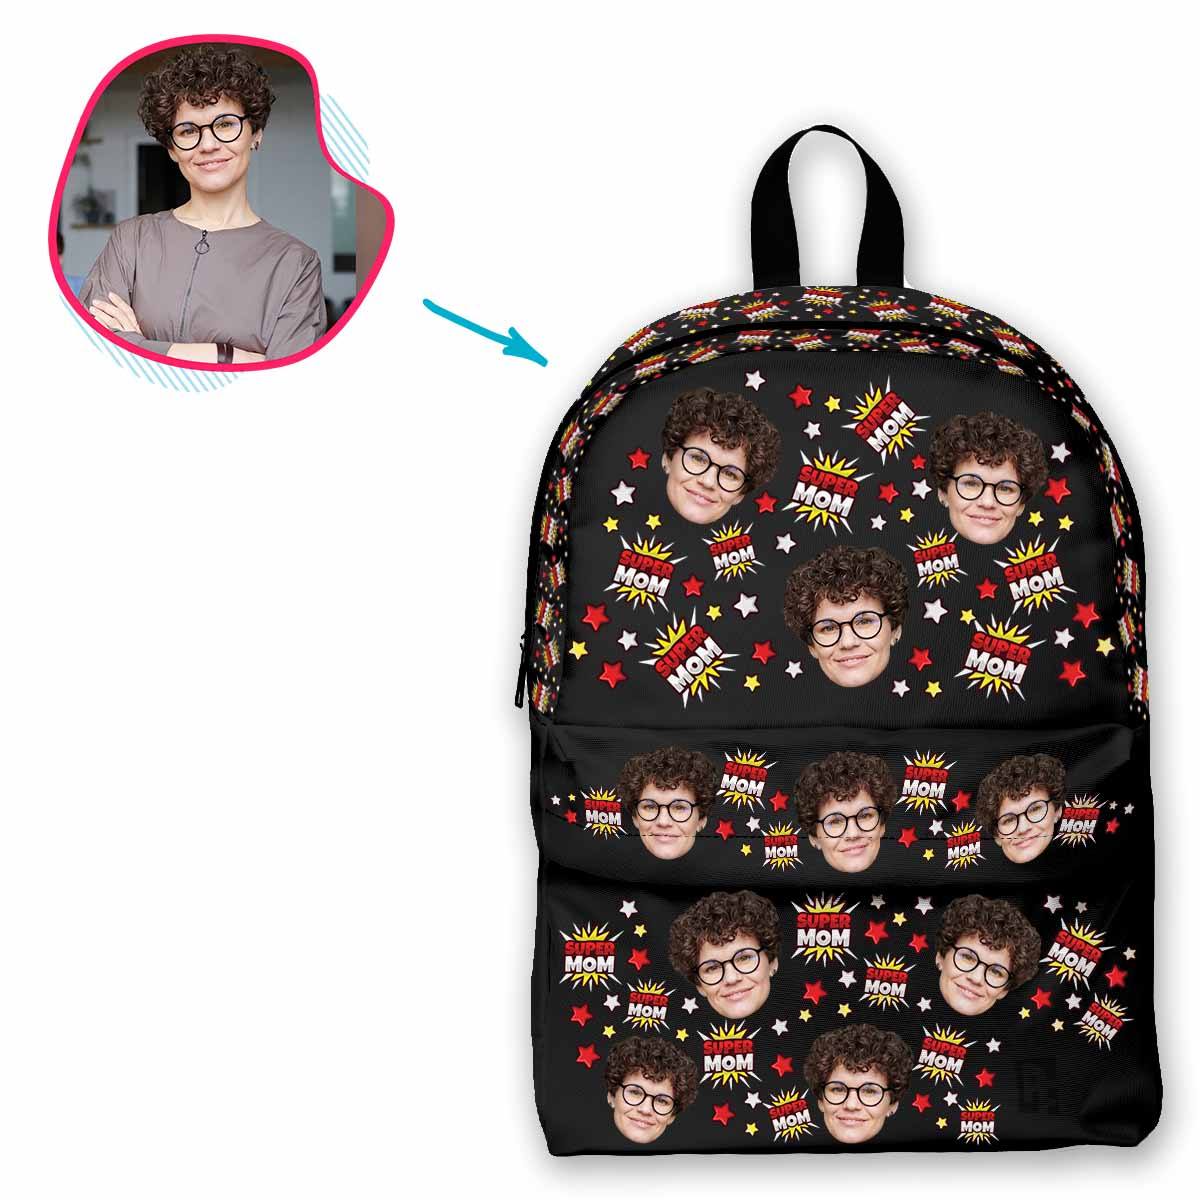 dark Super Mom classic backpack personalized with photo of face printed on it